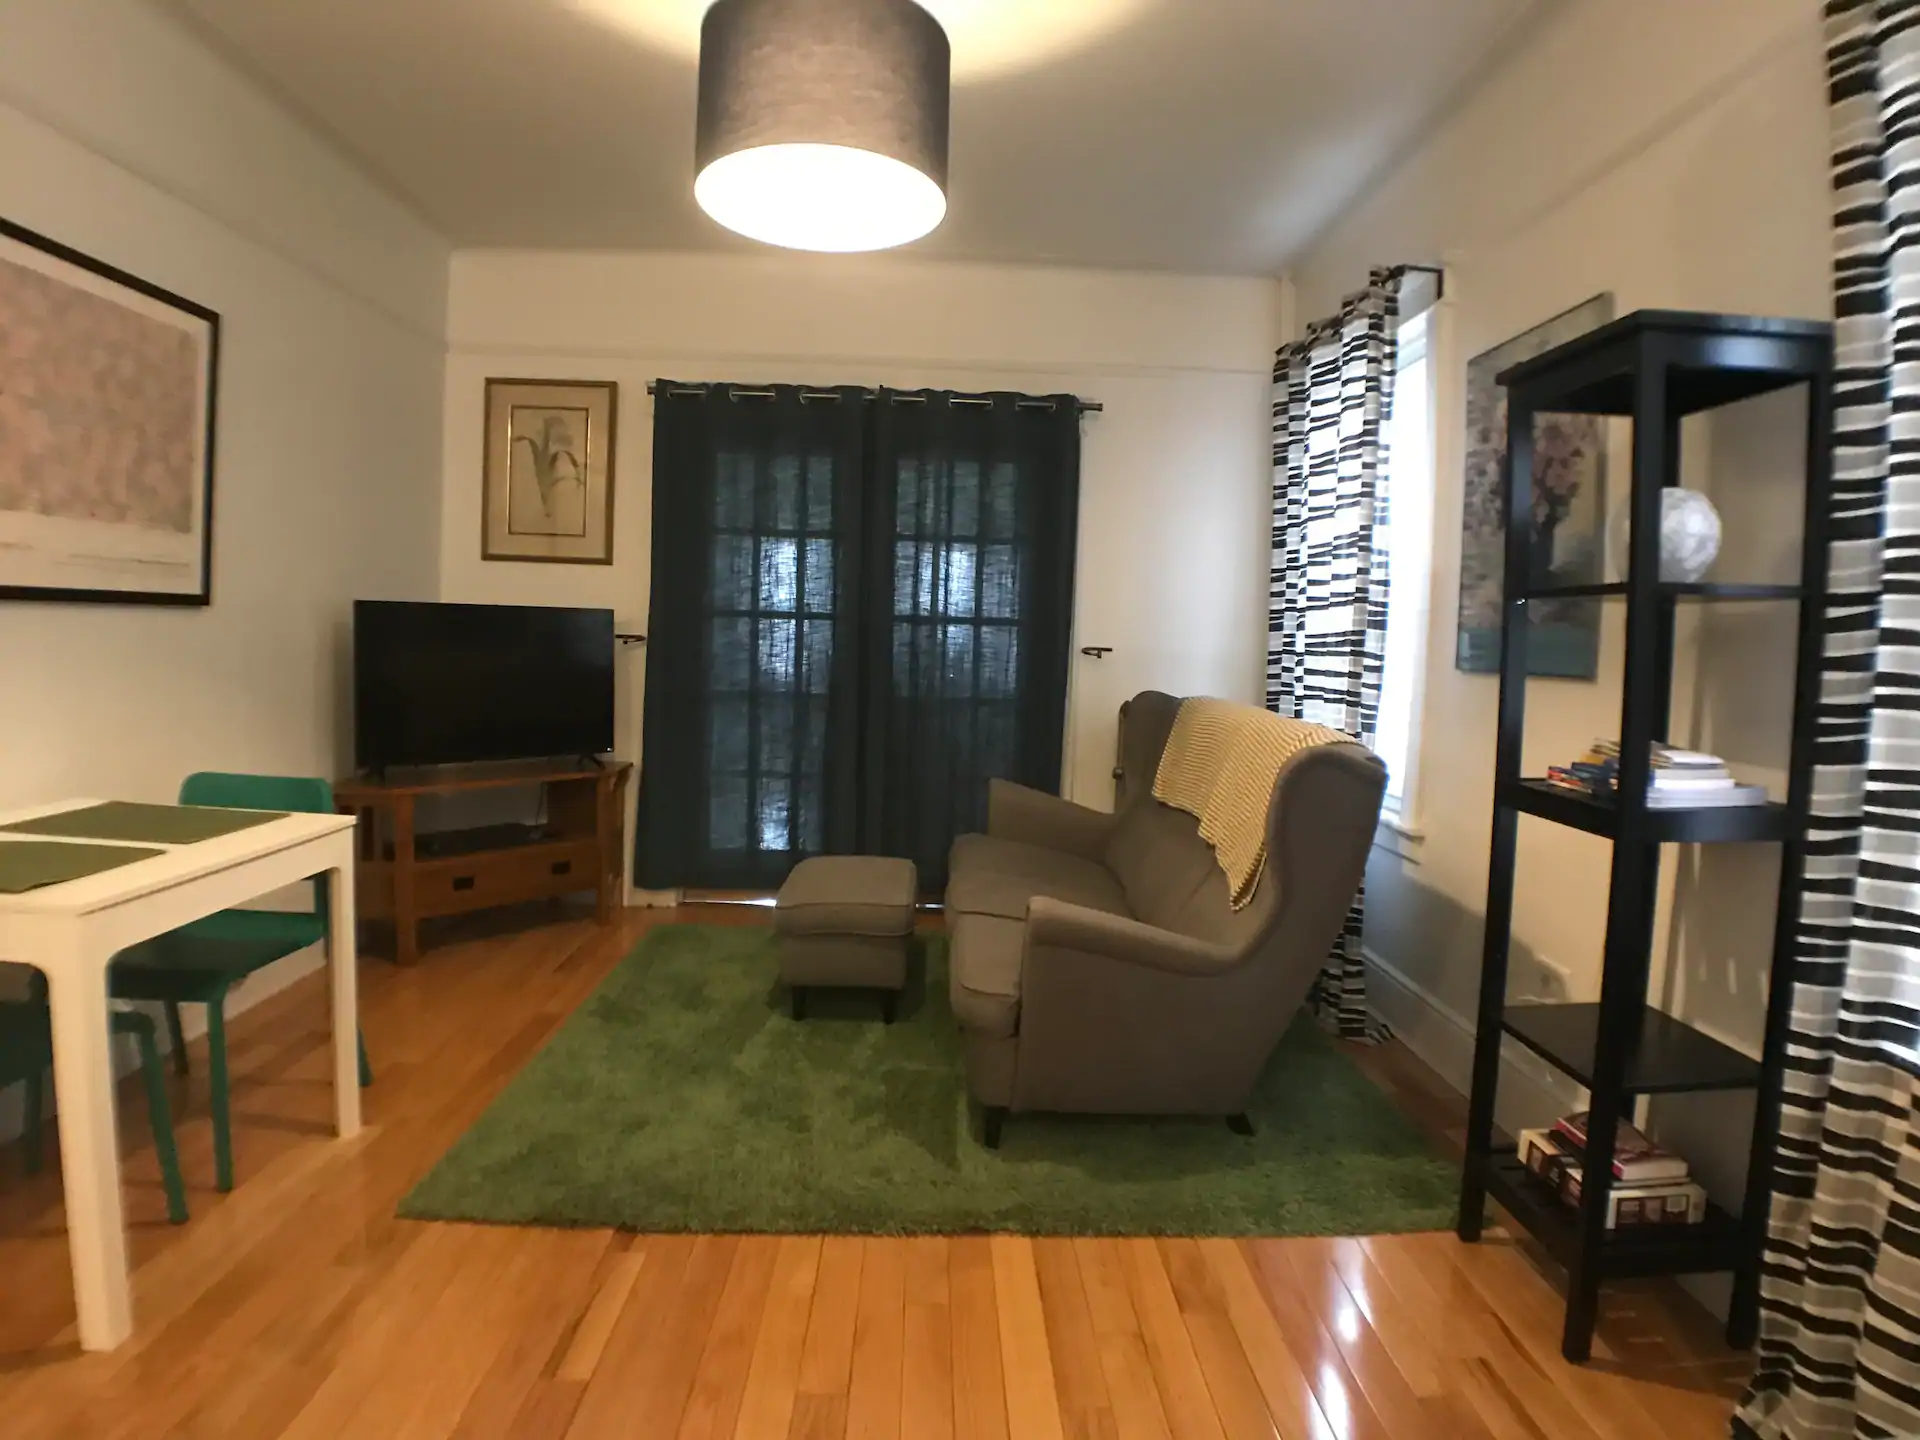 Photo of apartment in Brooklyn where you can stay during your New York road trip.